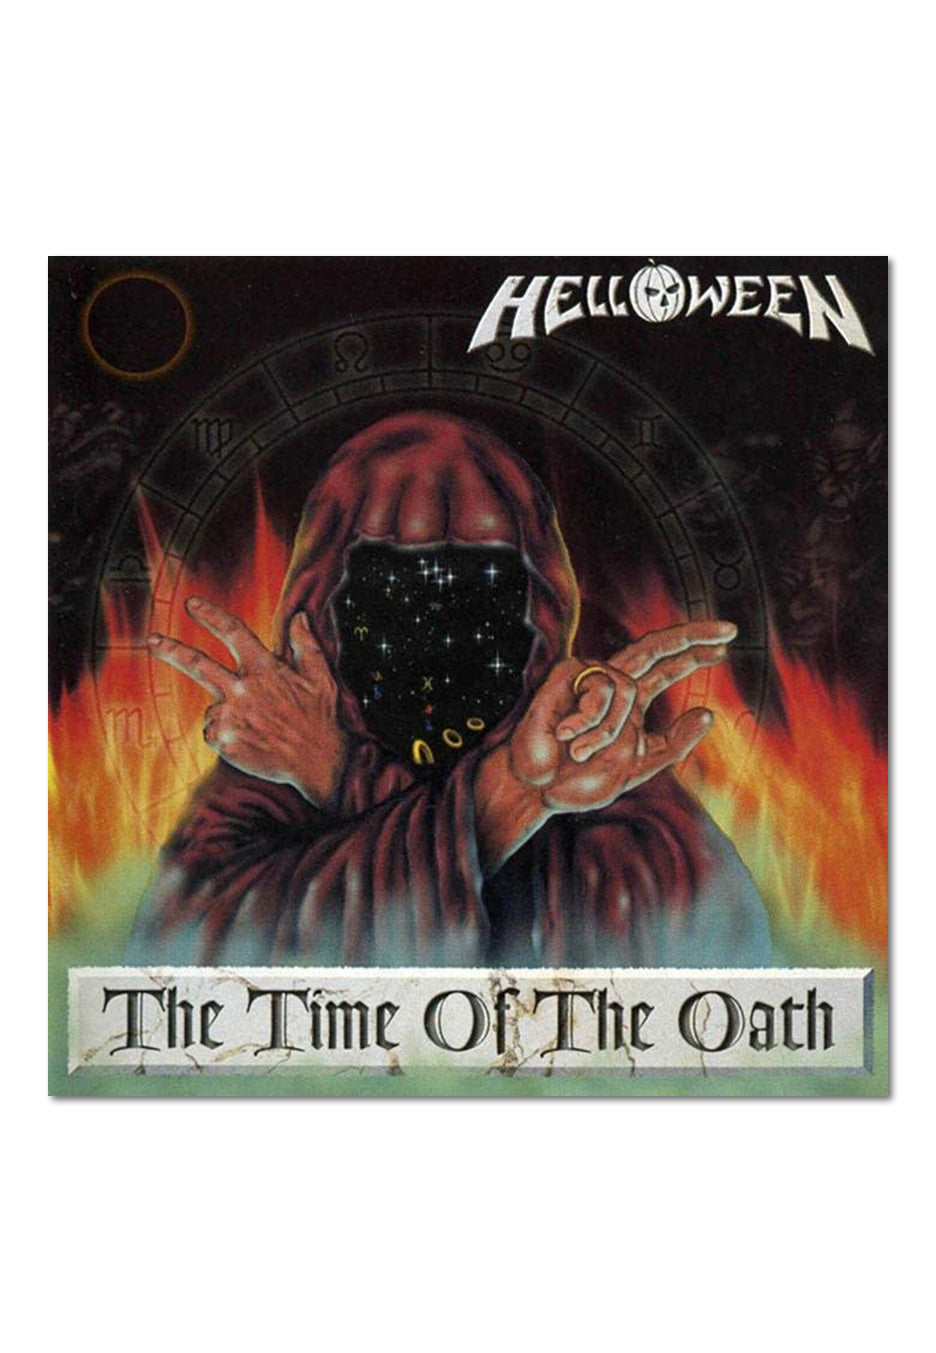 Helloween - The Time Of The Oath Re-Release - 2 CD